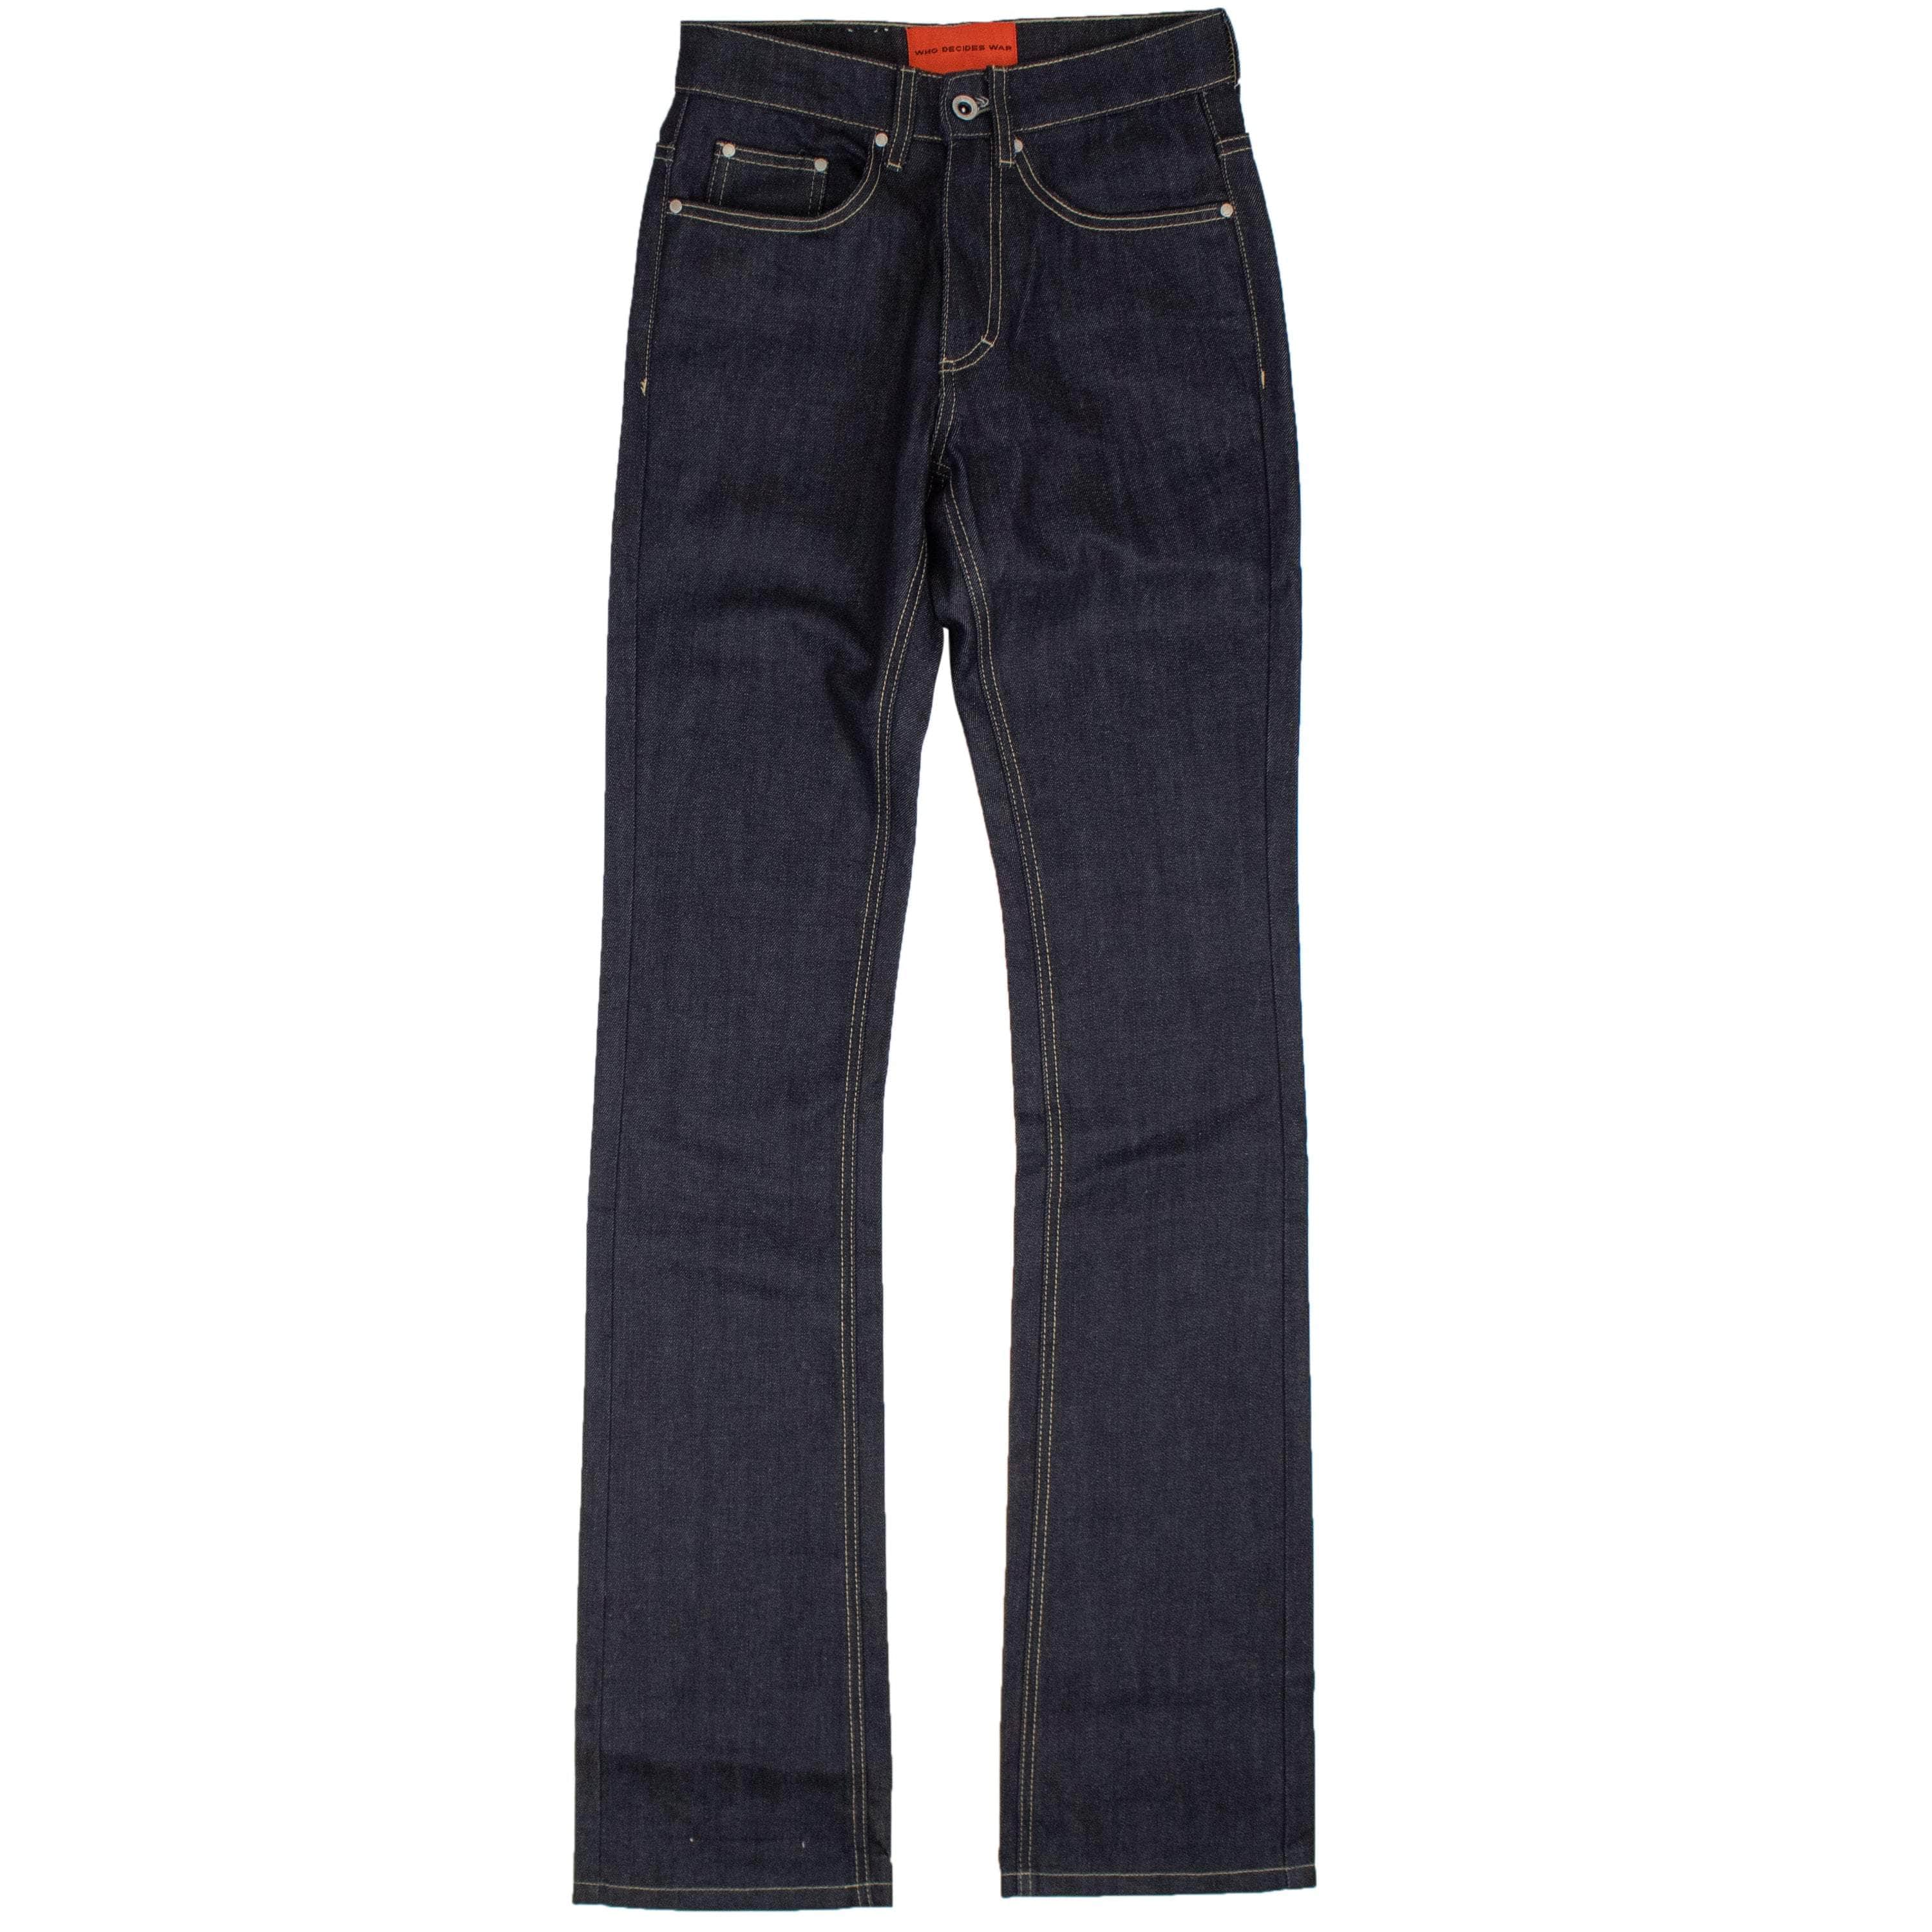 Who Decides War 250-500, channelenable-all, chicmi, couponcollection, main-clothing, mens-straight-fit-jeans, shop375, who-decides-war 24 Black Selvage Denim Jeans 95-WDW-1063/24 95-WDW-1063/24